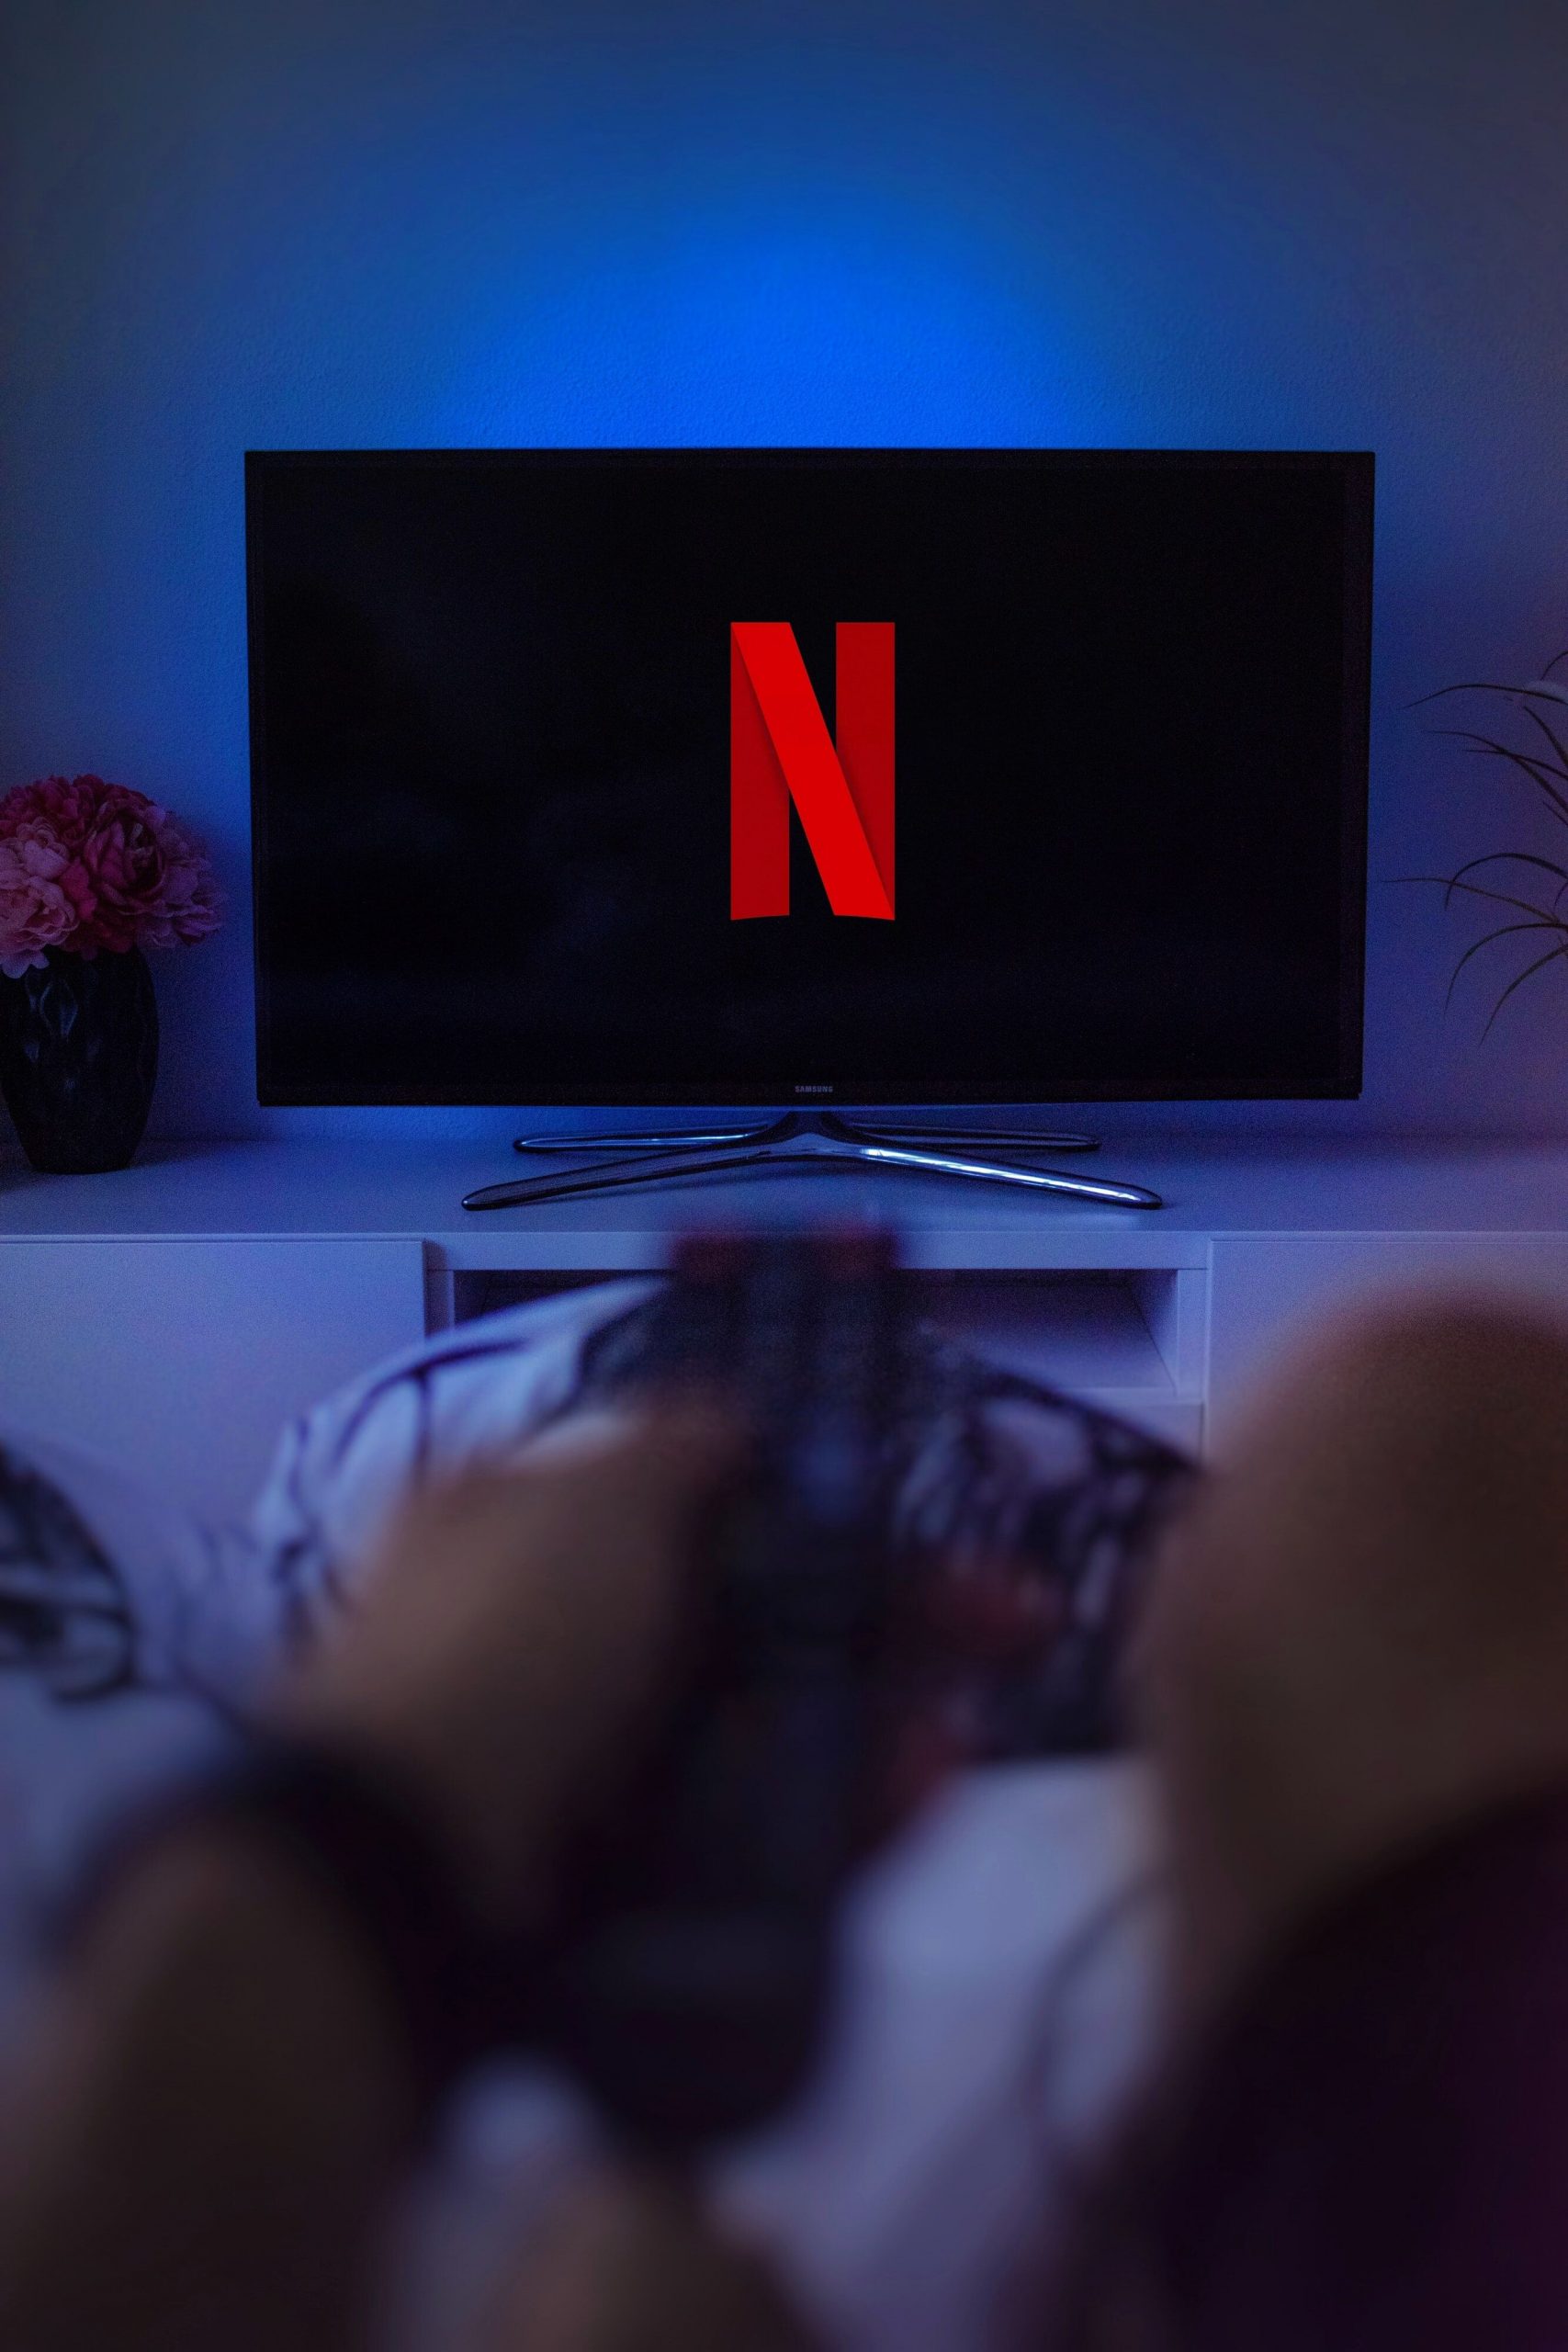 Netflix confirms the launch of video games as an add-on to member subscriptions